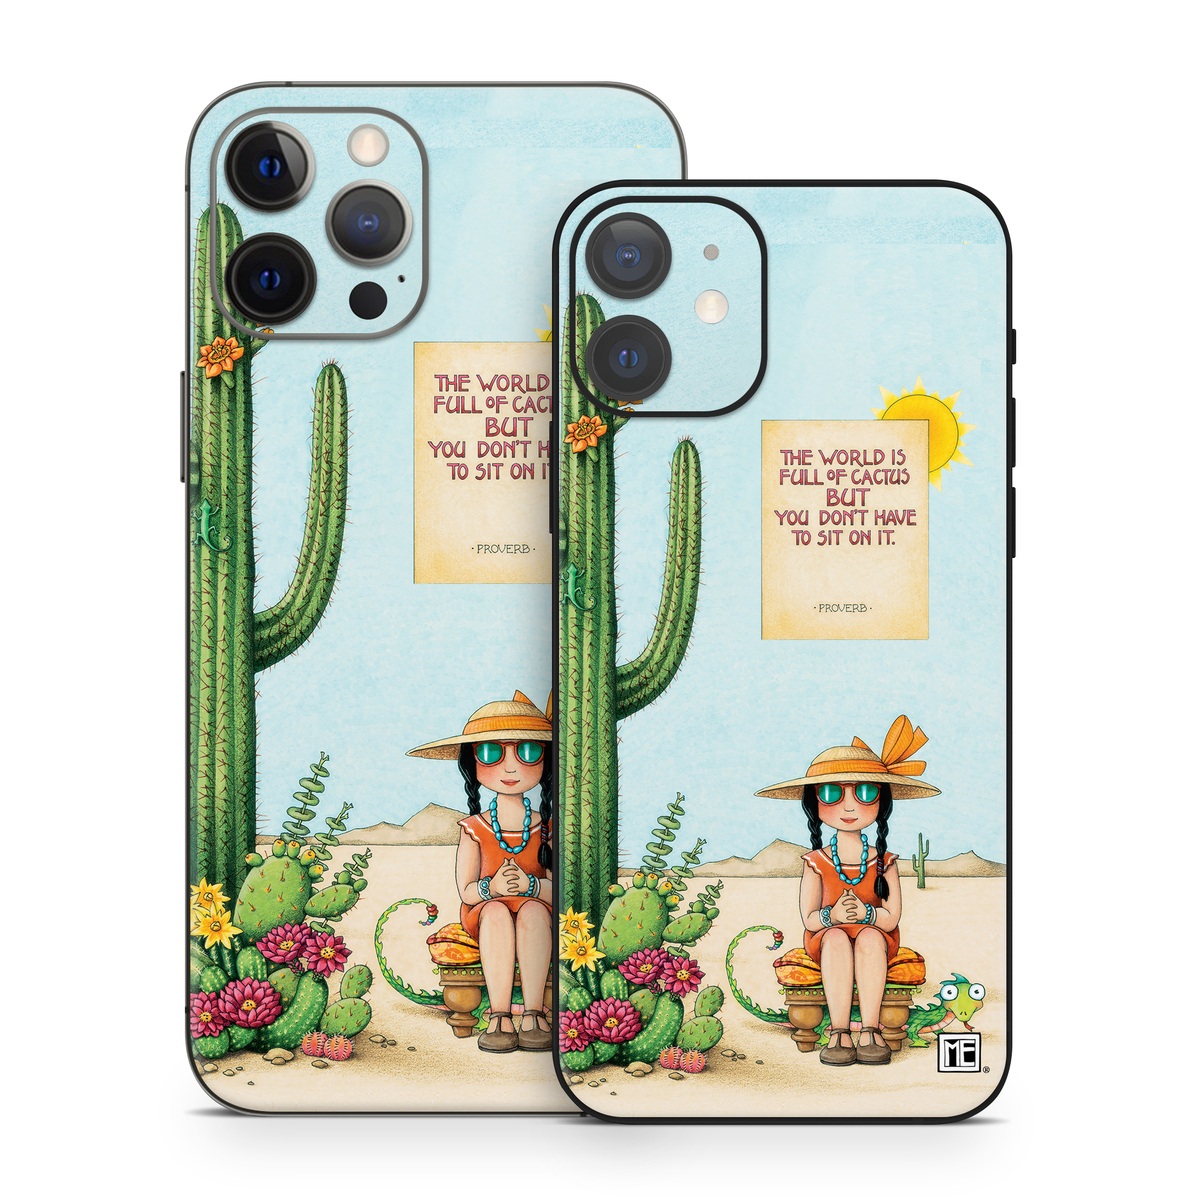 iPhone 12 Series Skin design of Cartoon, Cactus, Illustration, Animated cartoon, Plant, Vegetable, Fictional character, Art, with green, yellow, pink, orange, brown colors